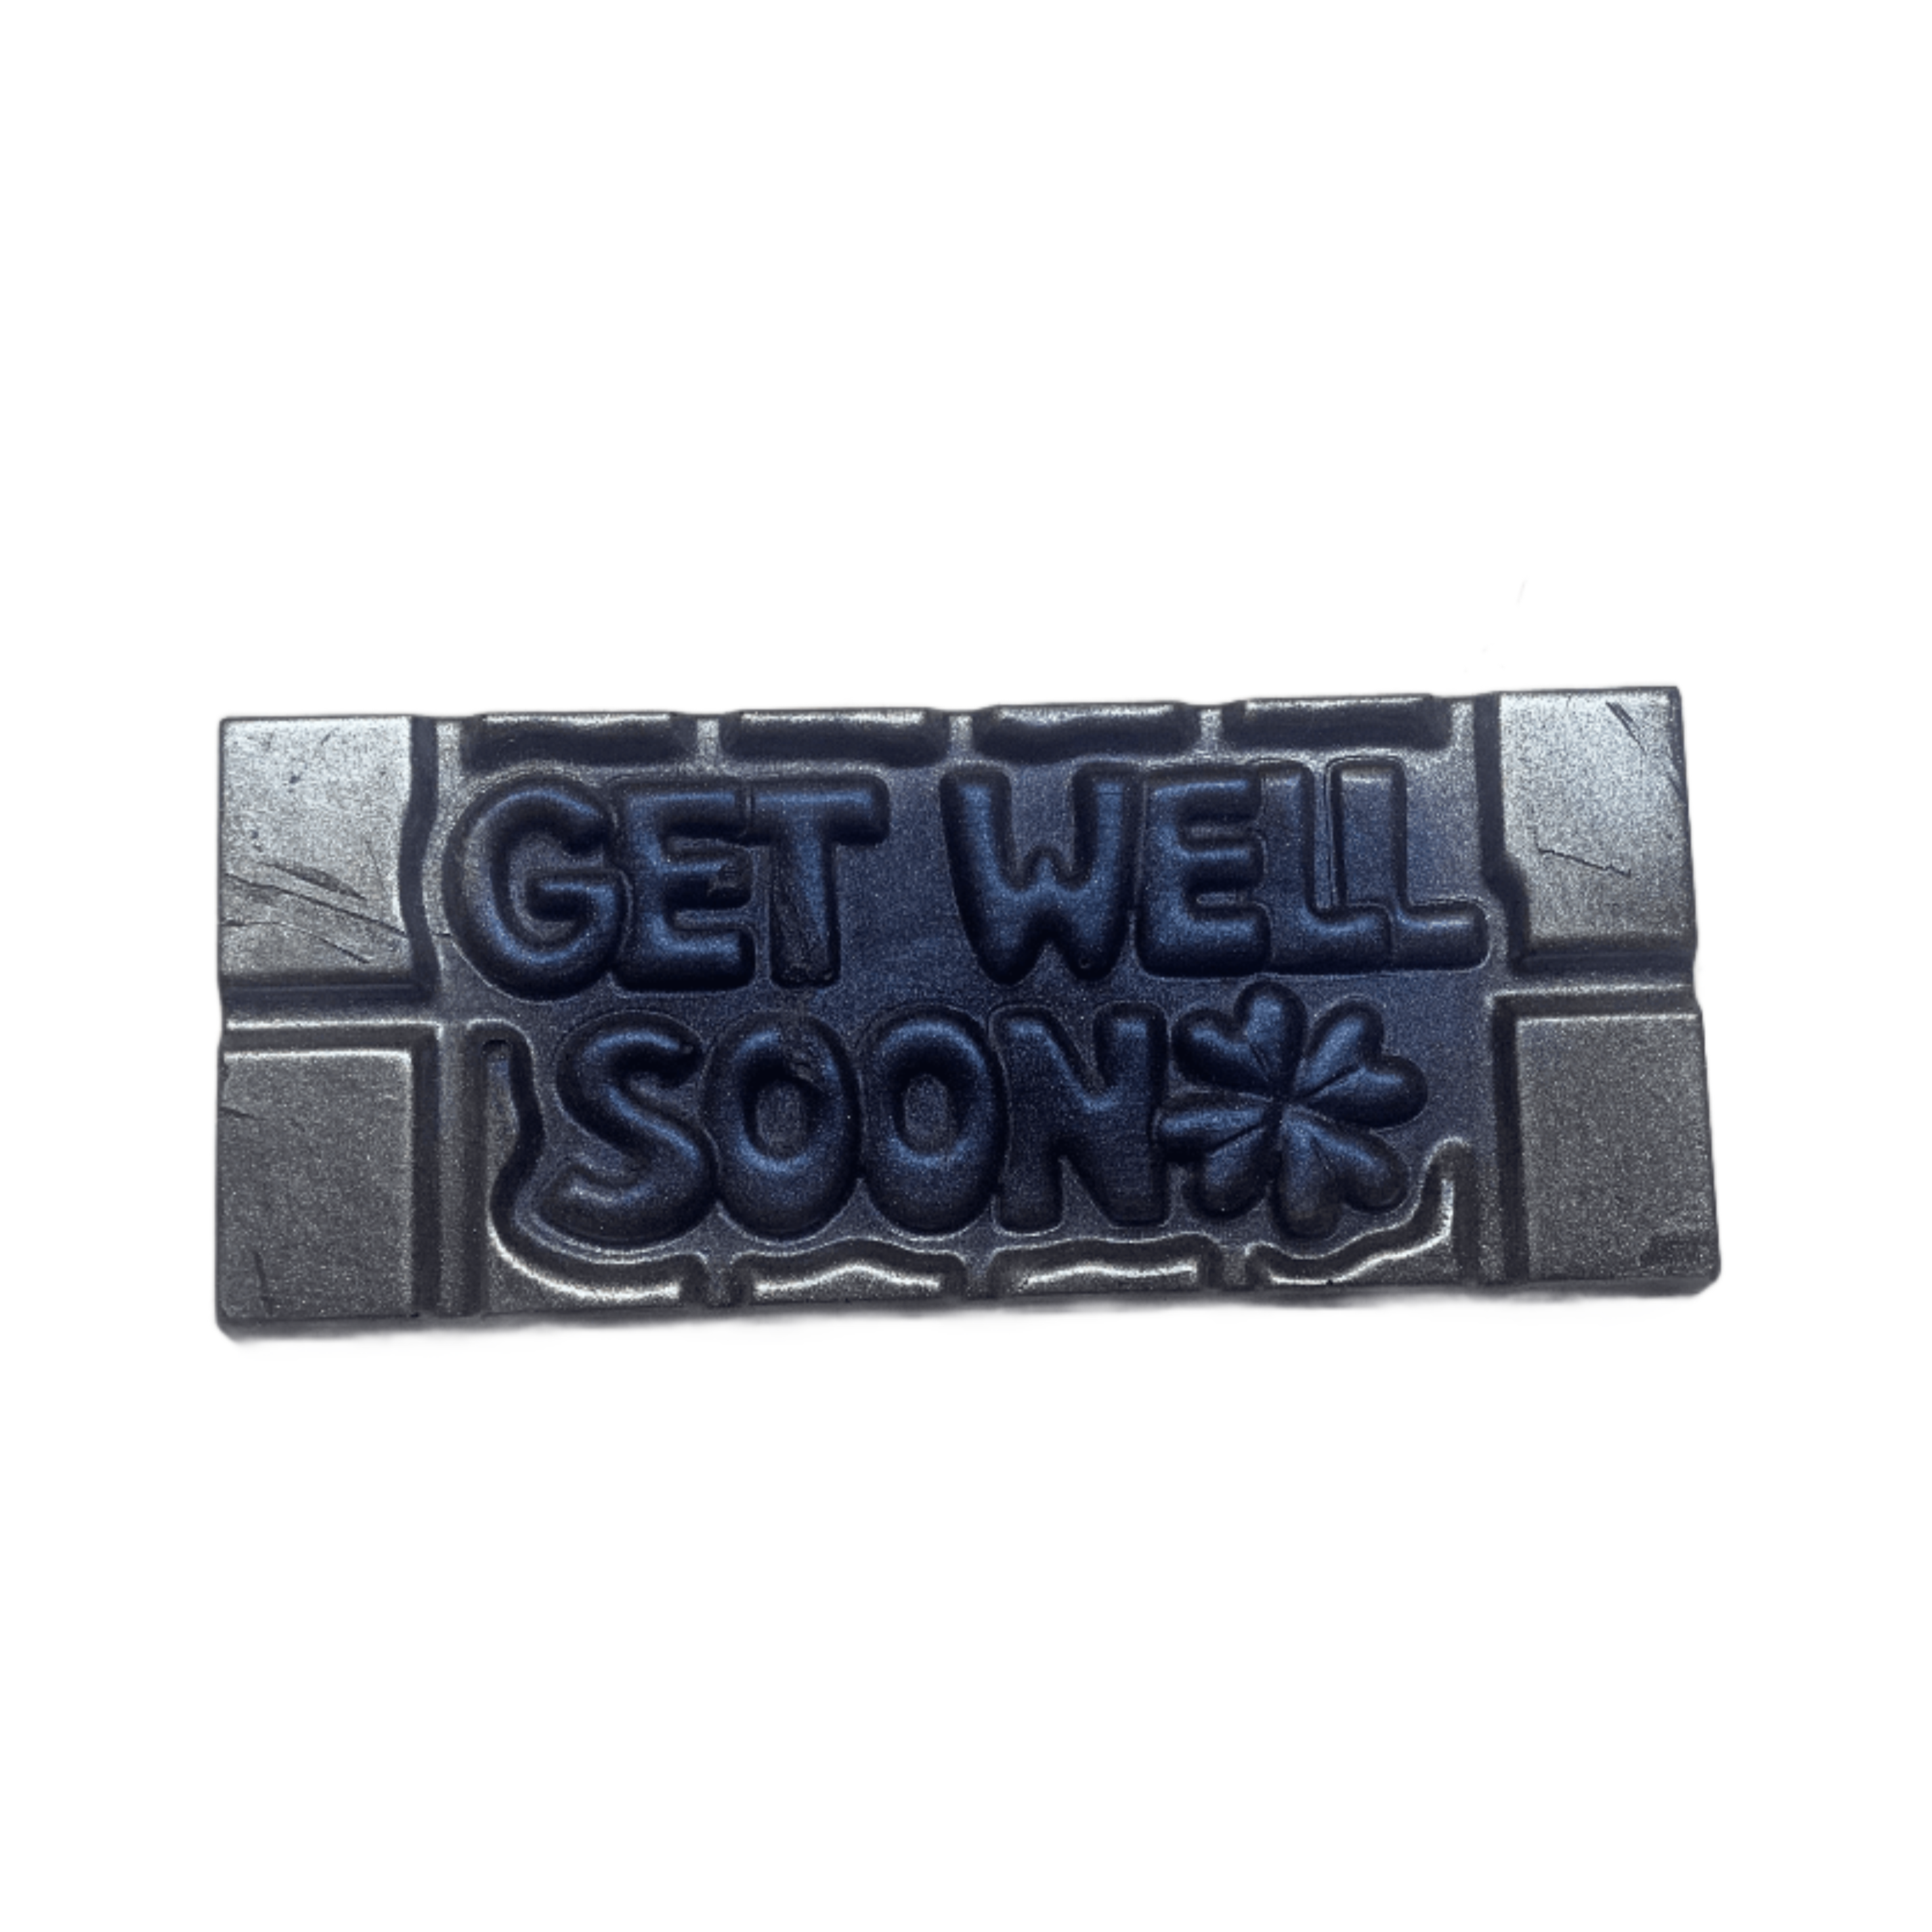 Say_Get_Well_Soon_Unwrapped-min.png